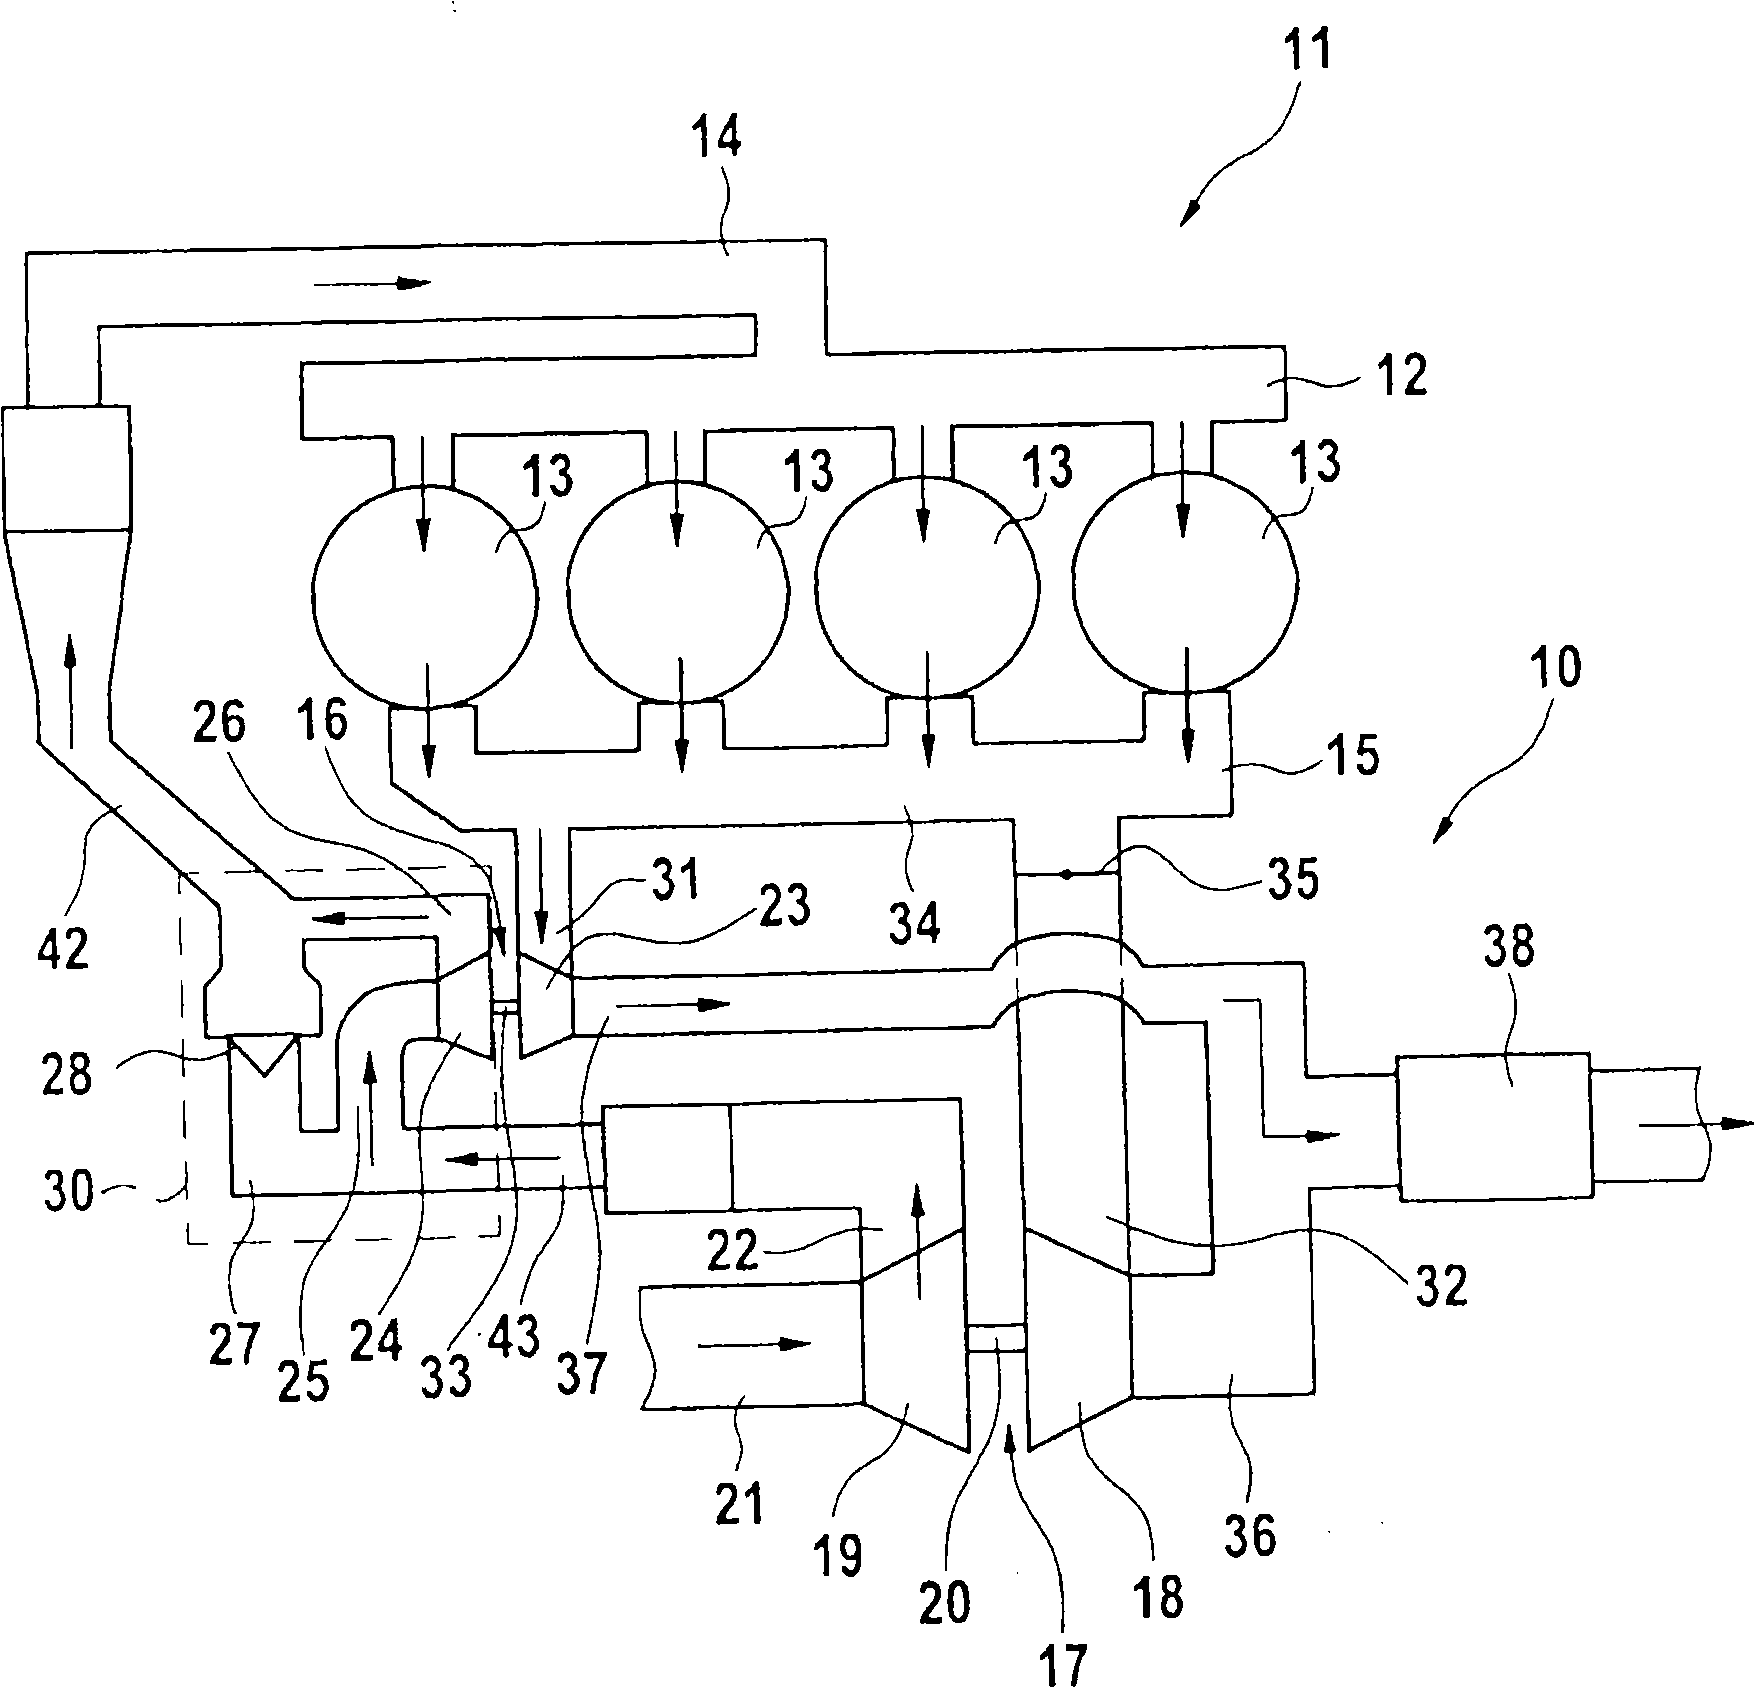 Arrangement of a two stage turbocharger system for an internal combustion engine